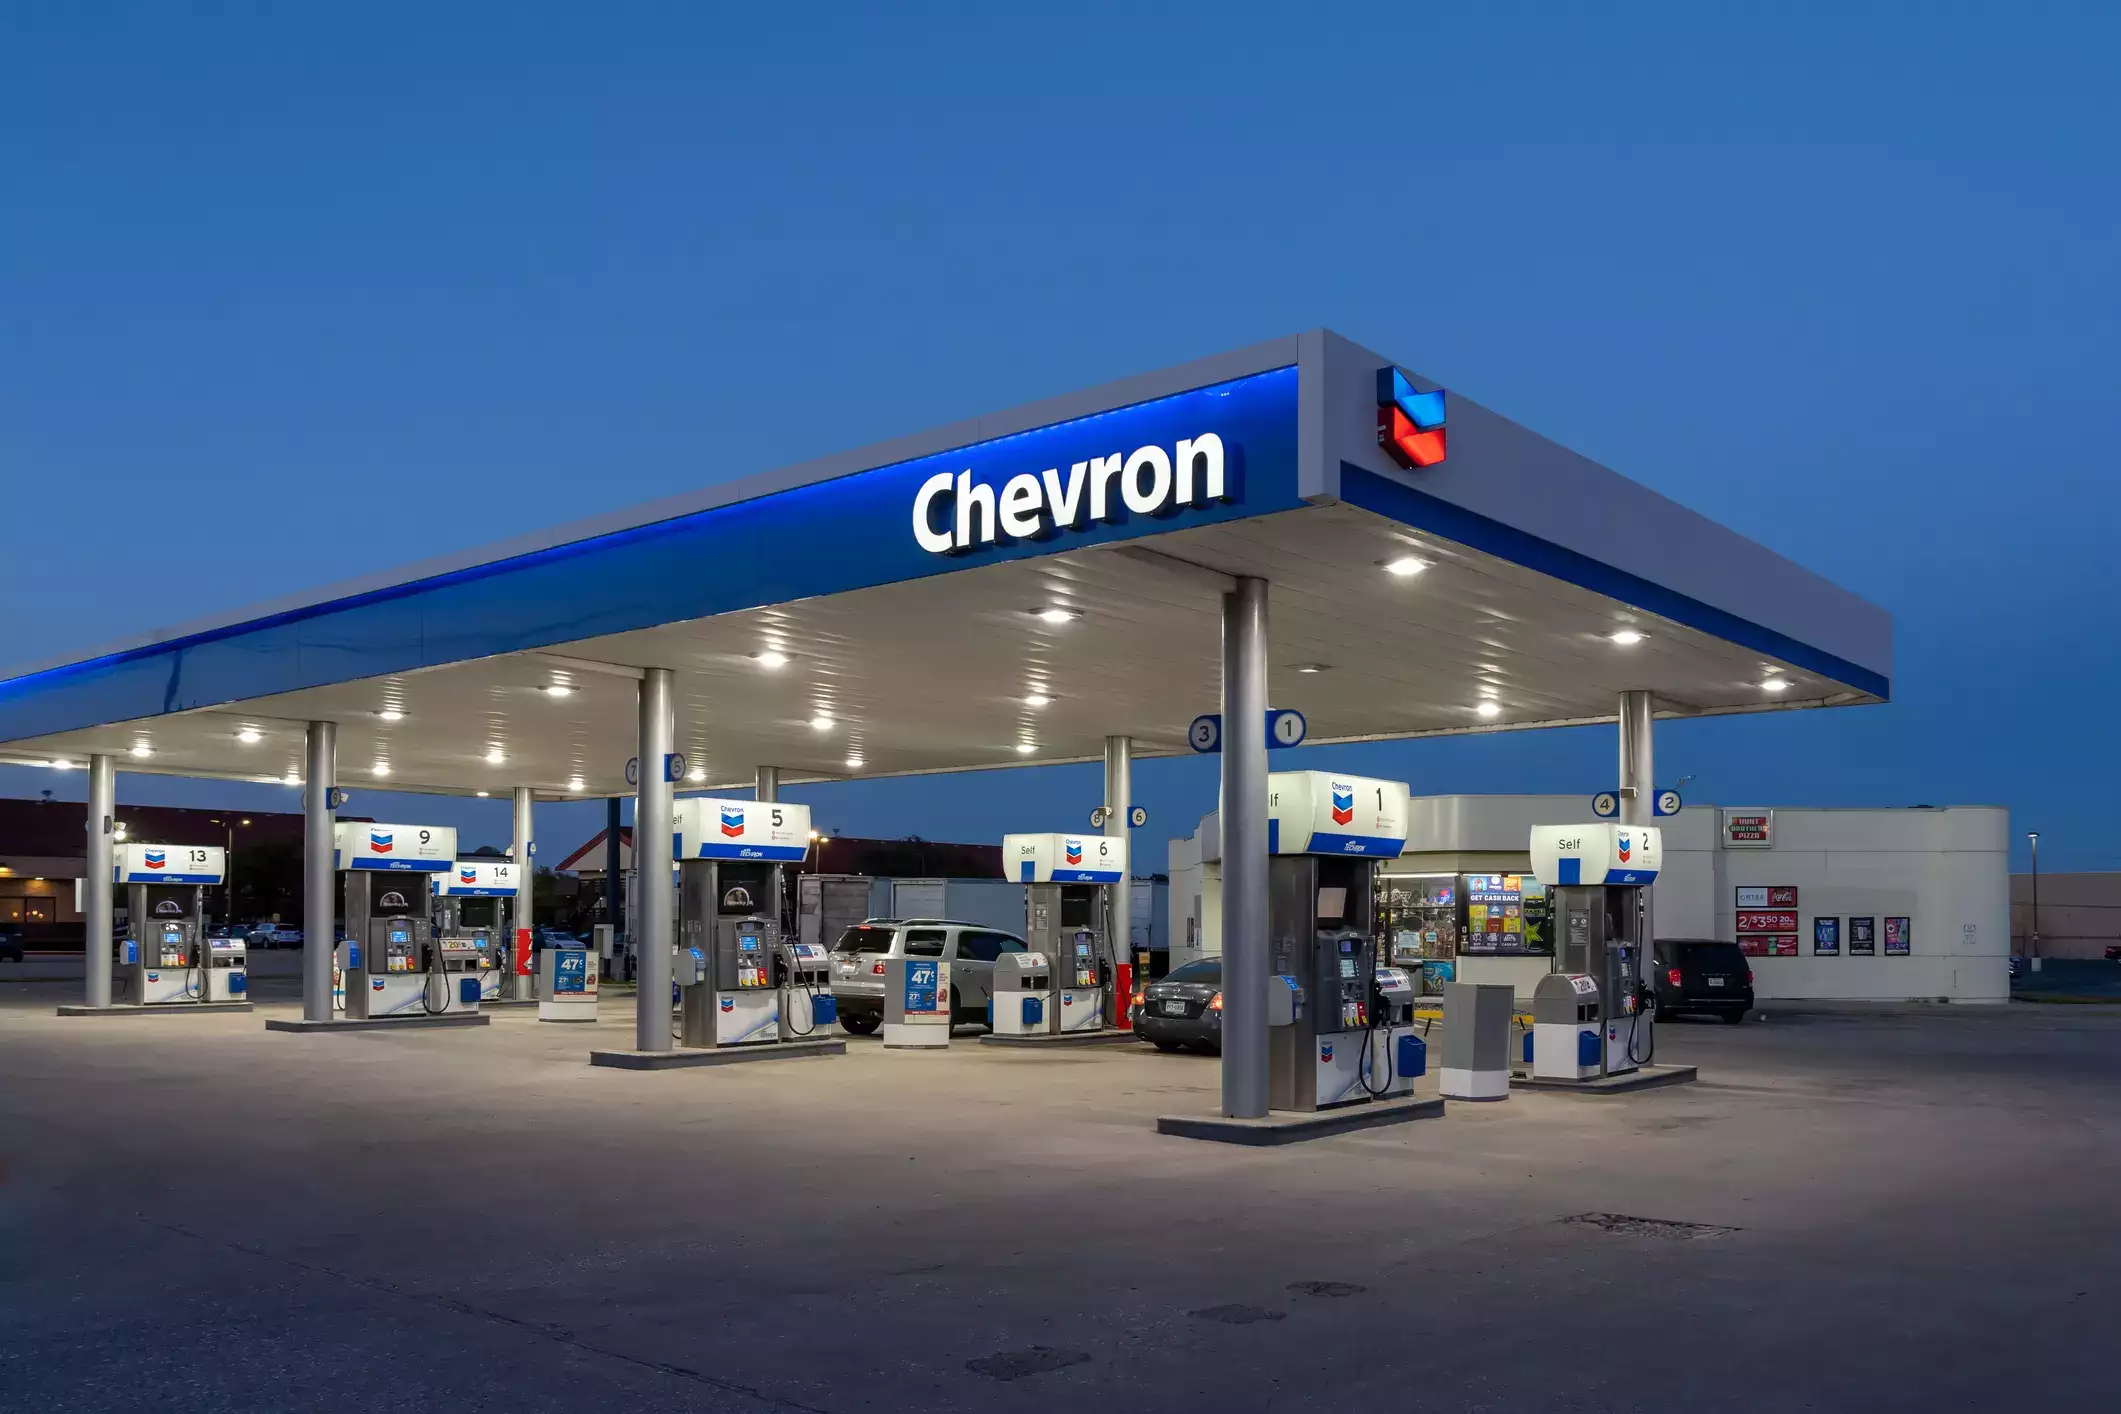 who are Chevron's joint venture partner